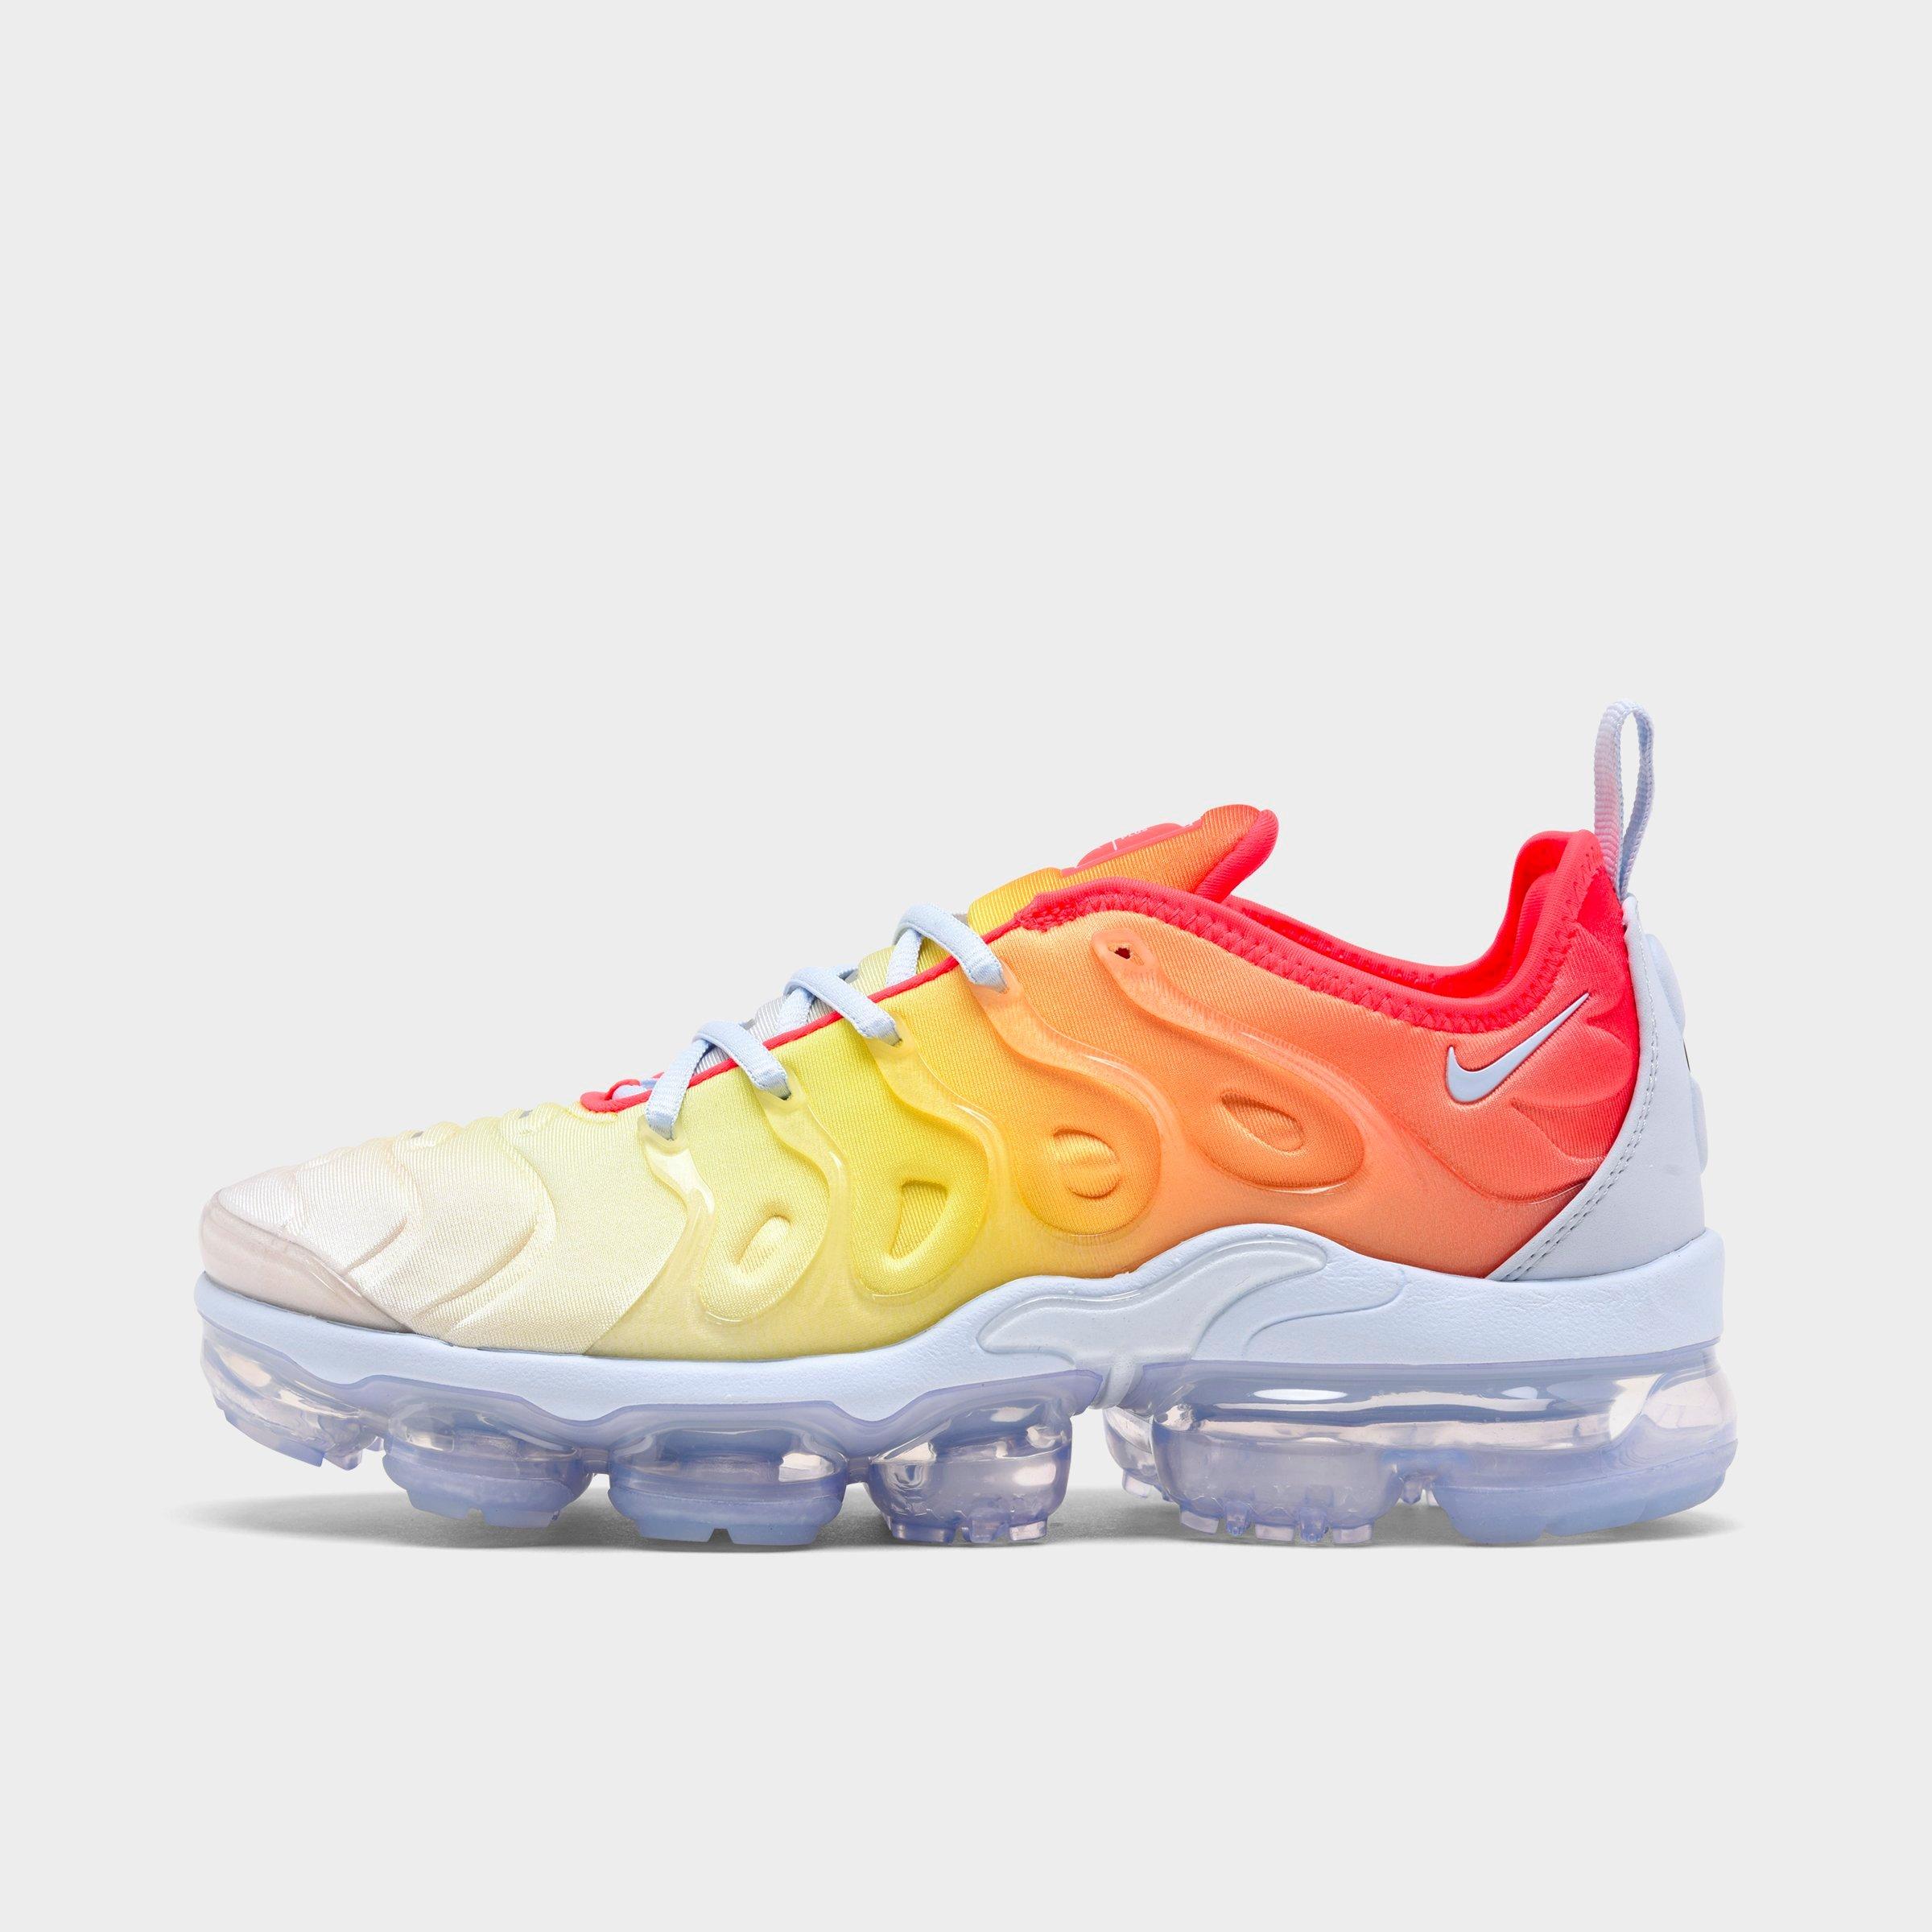 F. Snkr Store Nike Air VaporMax Plus WhiteFierce